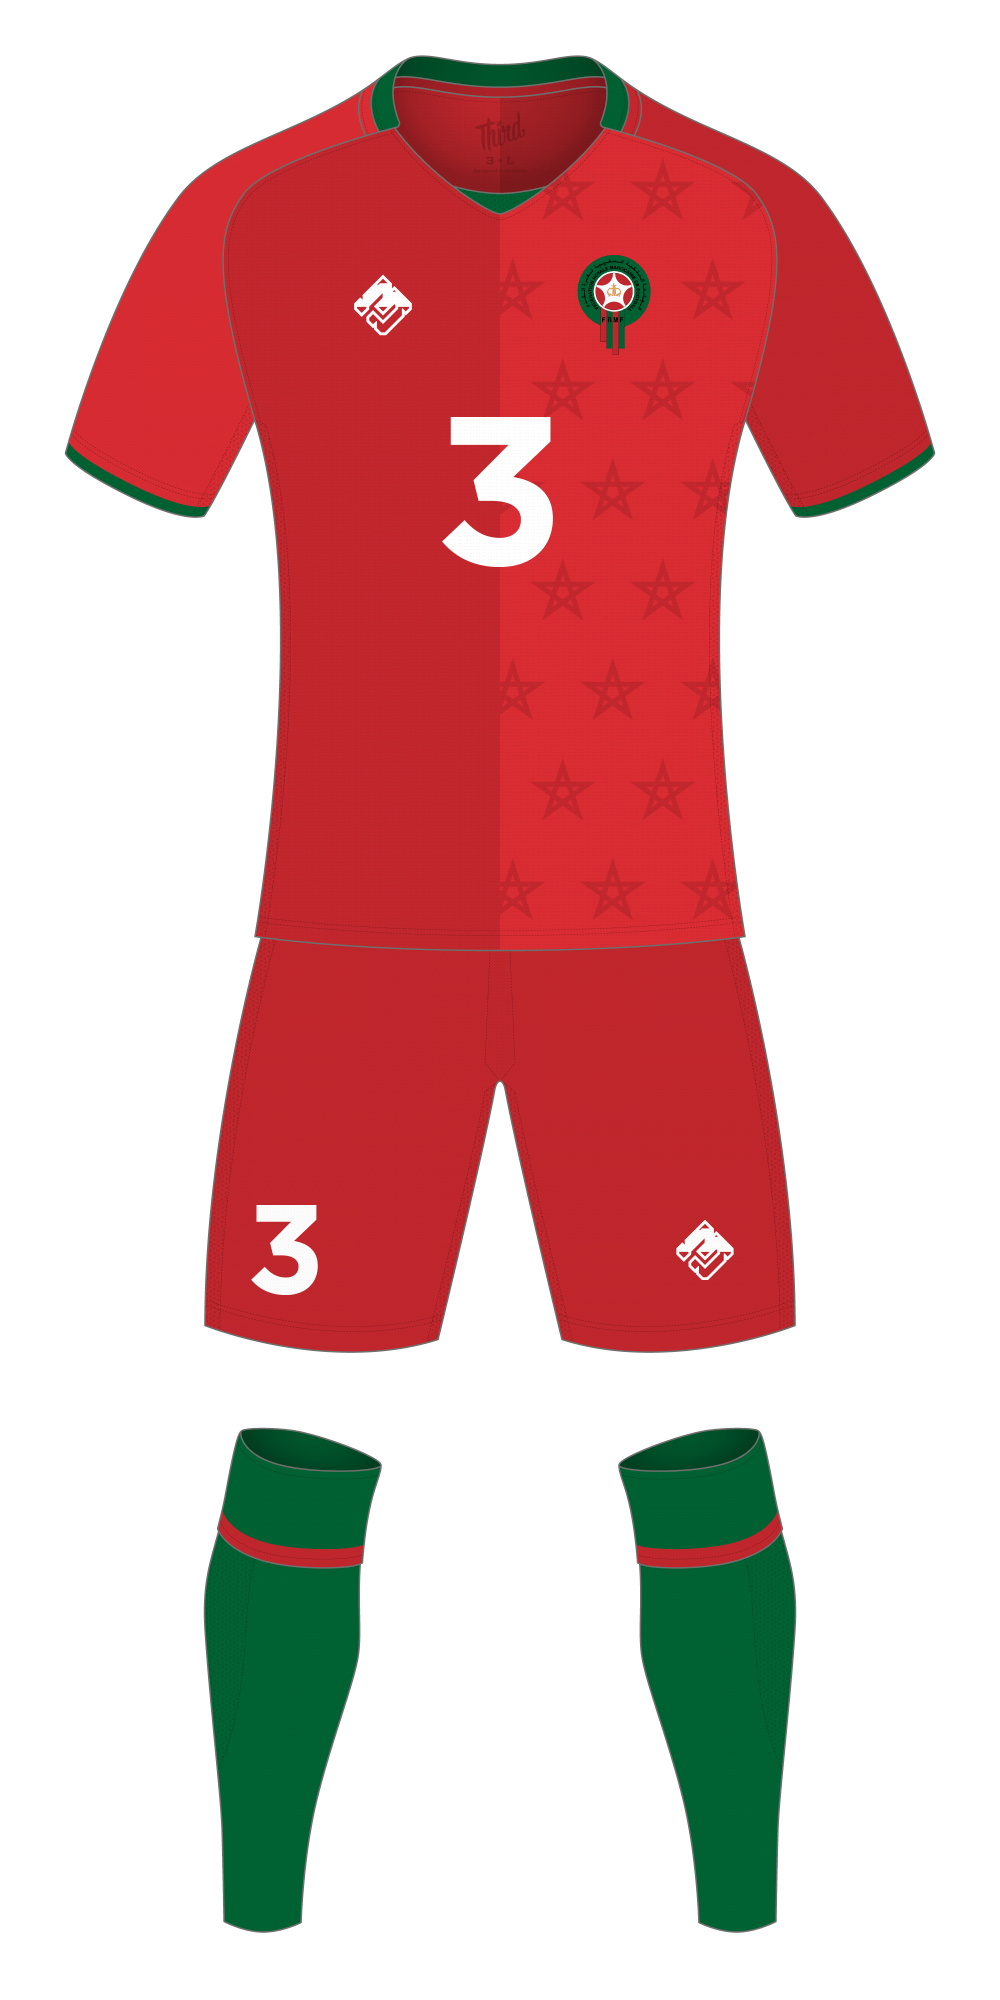 Morocco World Cup 2018 concept